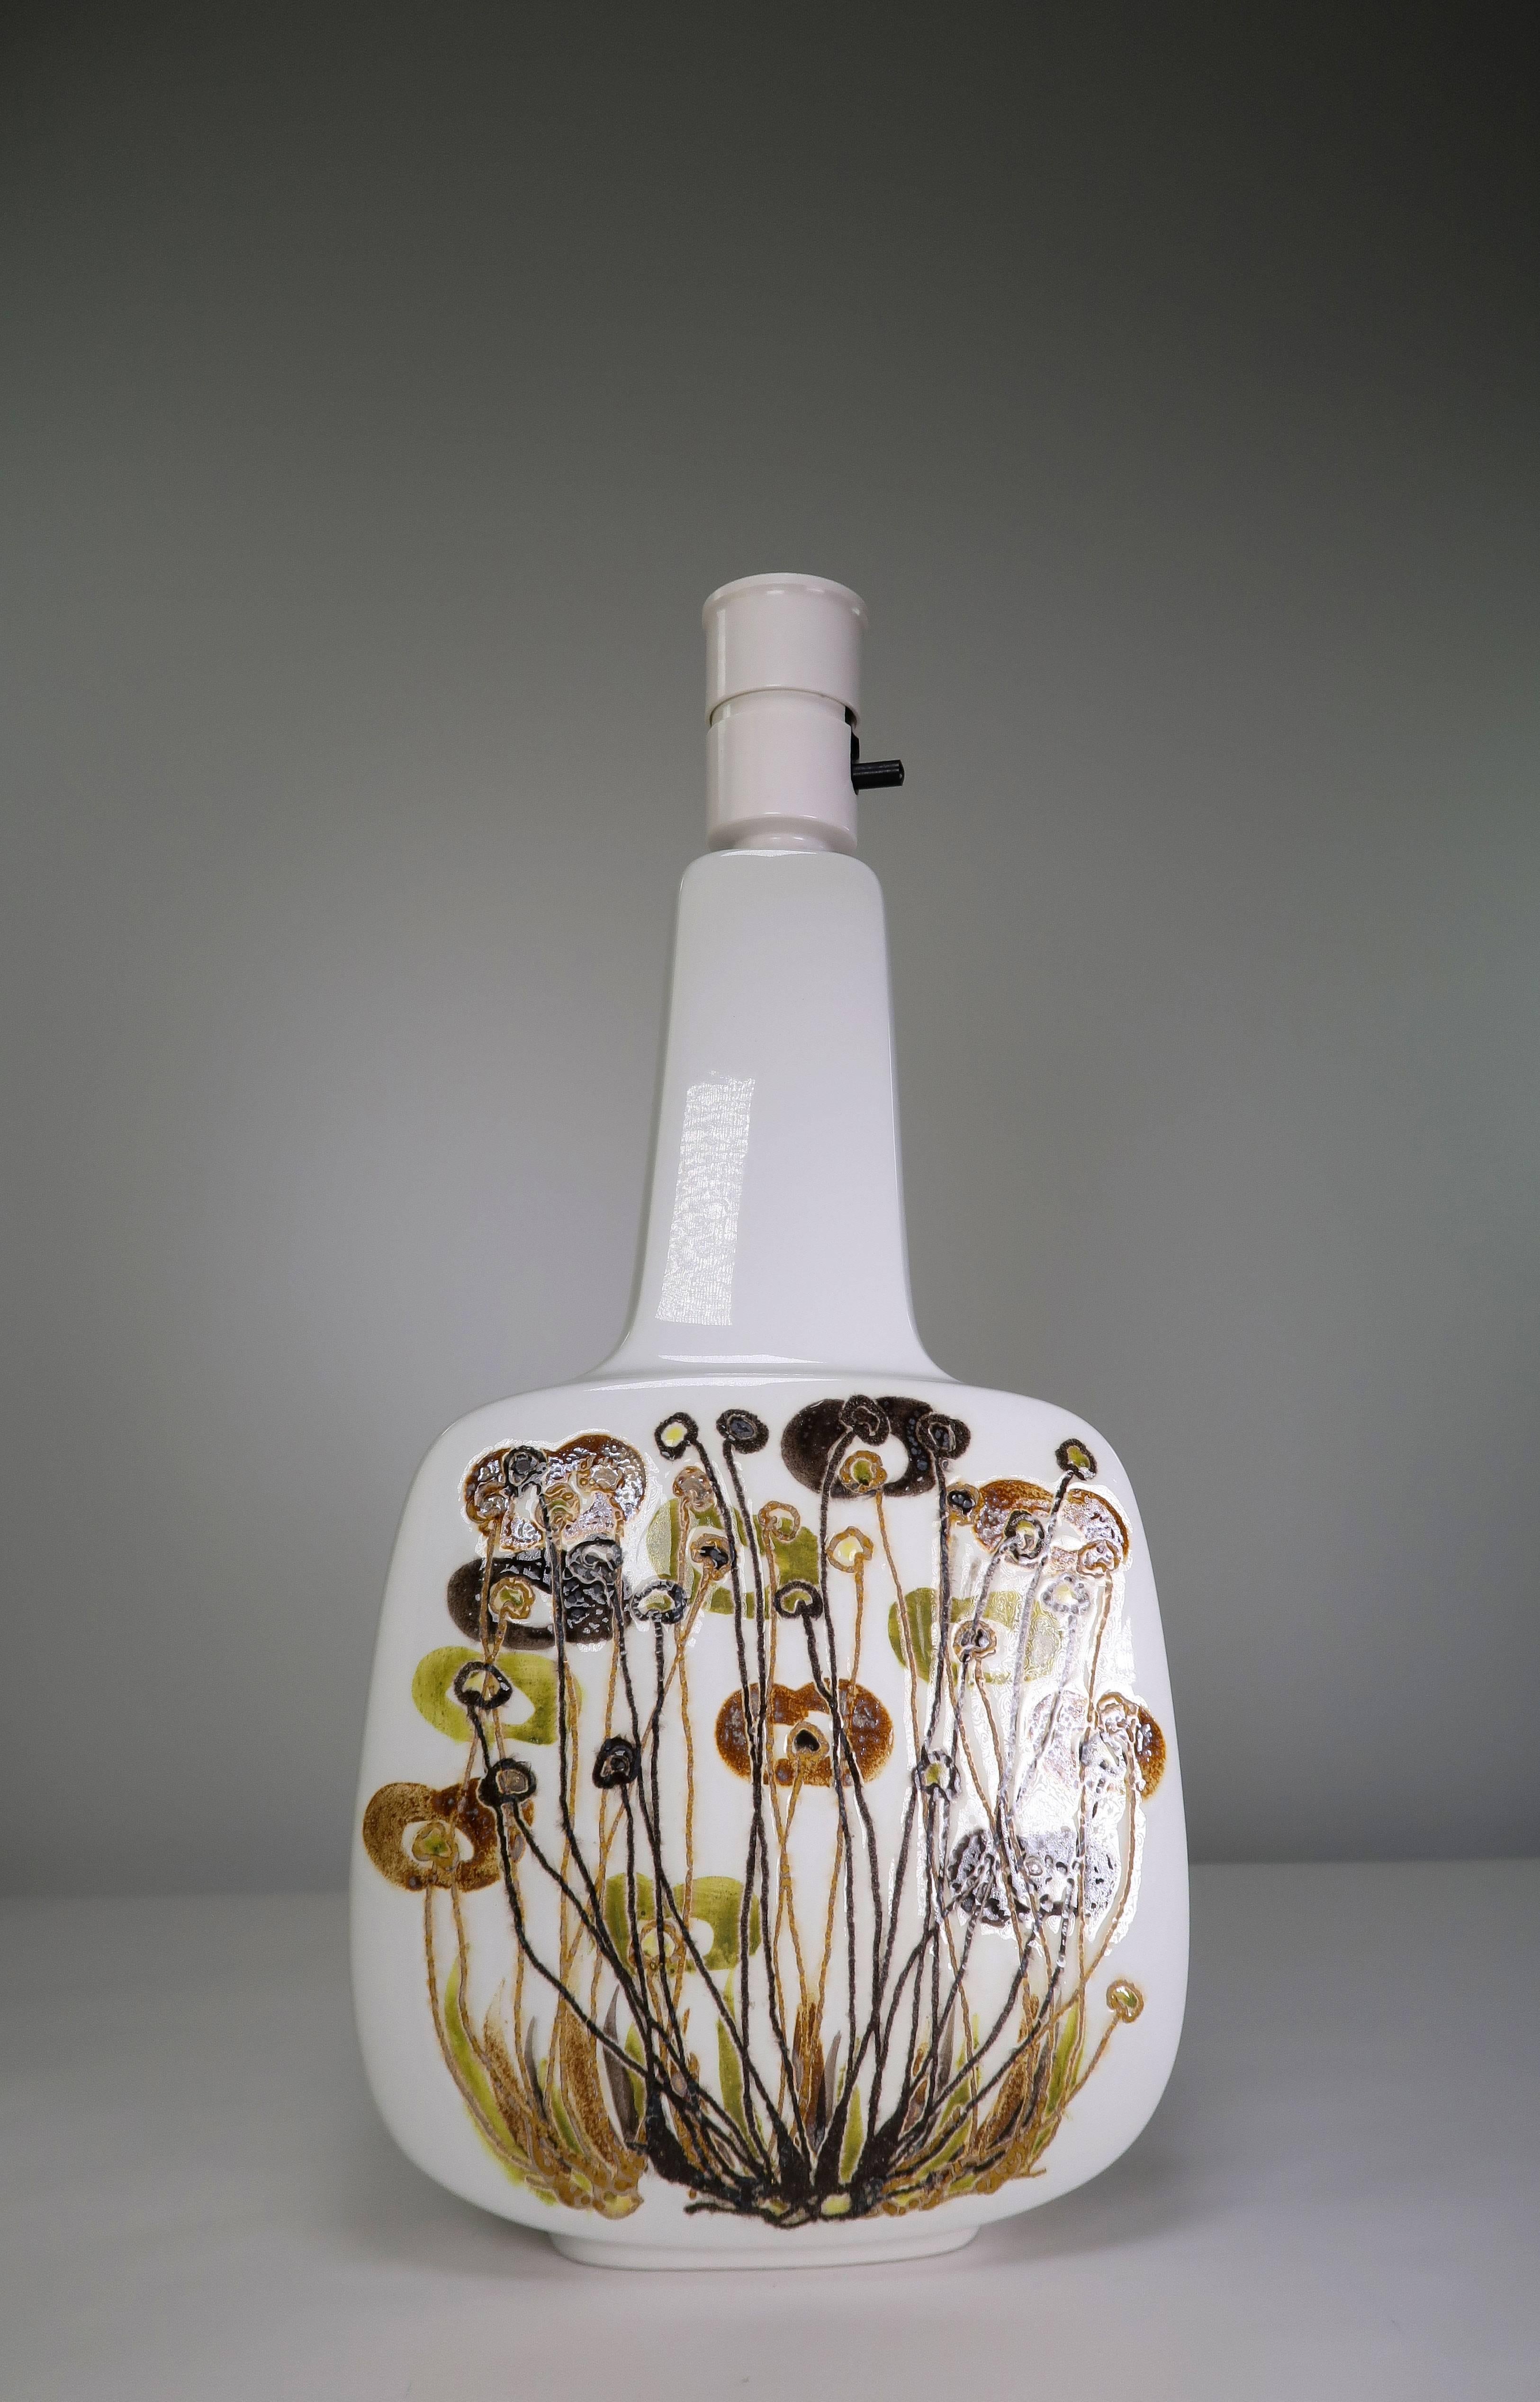 Classic Danish Mid-Century Modern hand painted faience sculptural table lamp by designer Ellen Malmer for Royal Copenhagen. Bone white faience decorated with an organic pattern of light brown, dark brown and green colored glaze depicting a flower